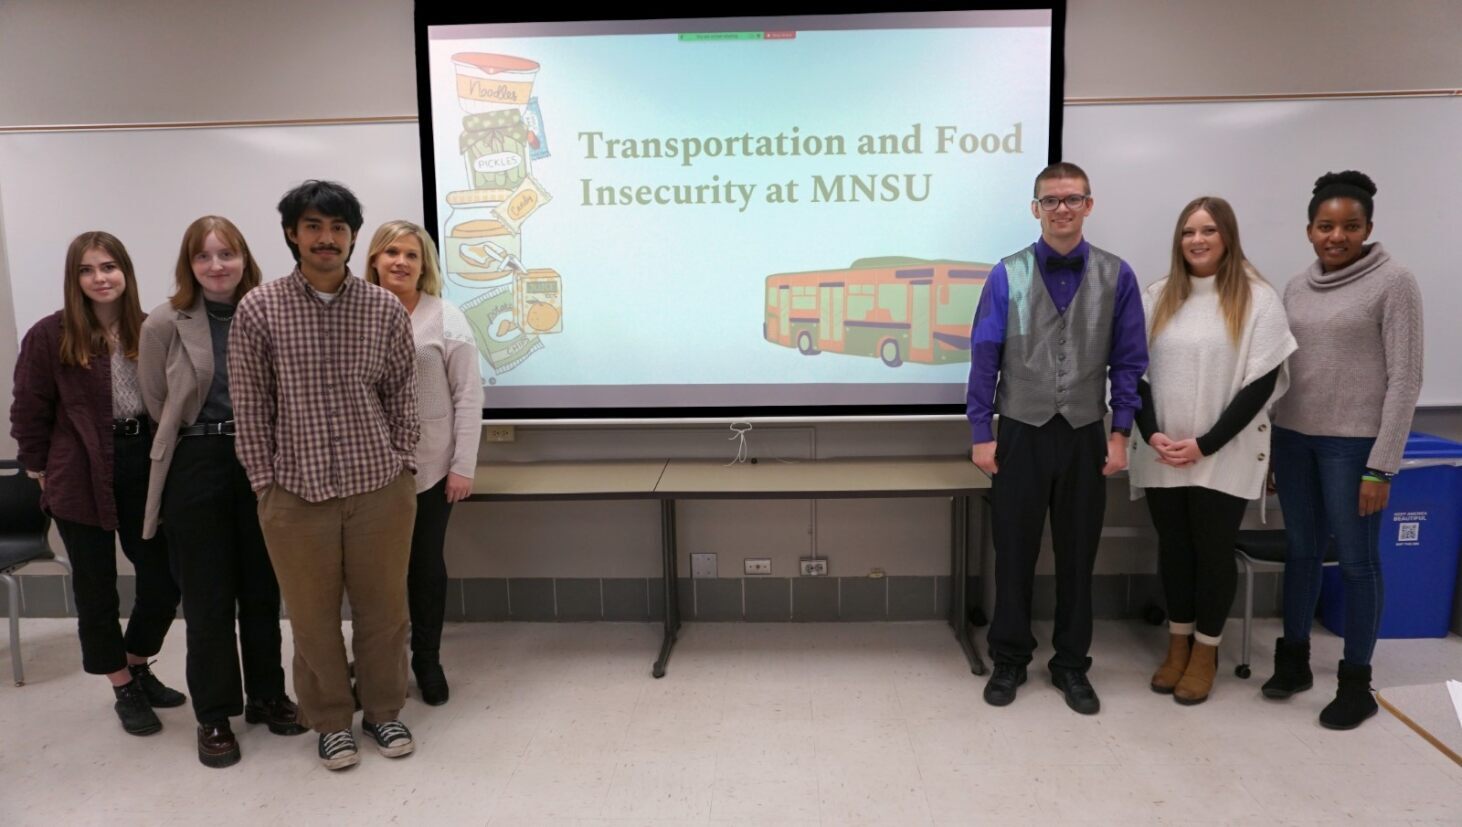 Students Presentation for Food Insecurity and Transportaion Sociology 